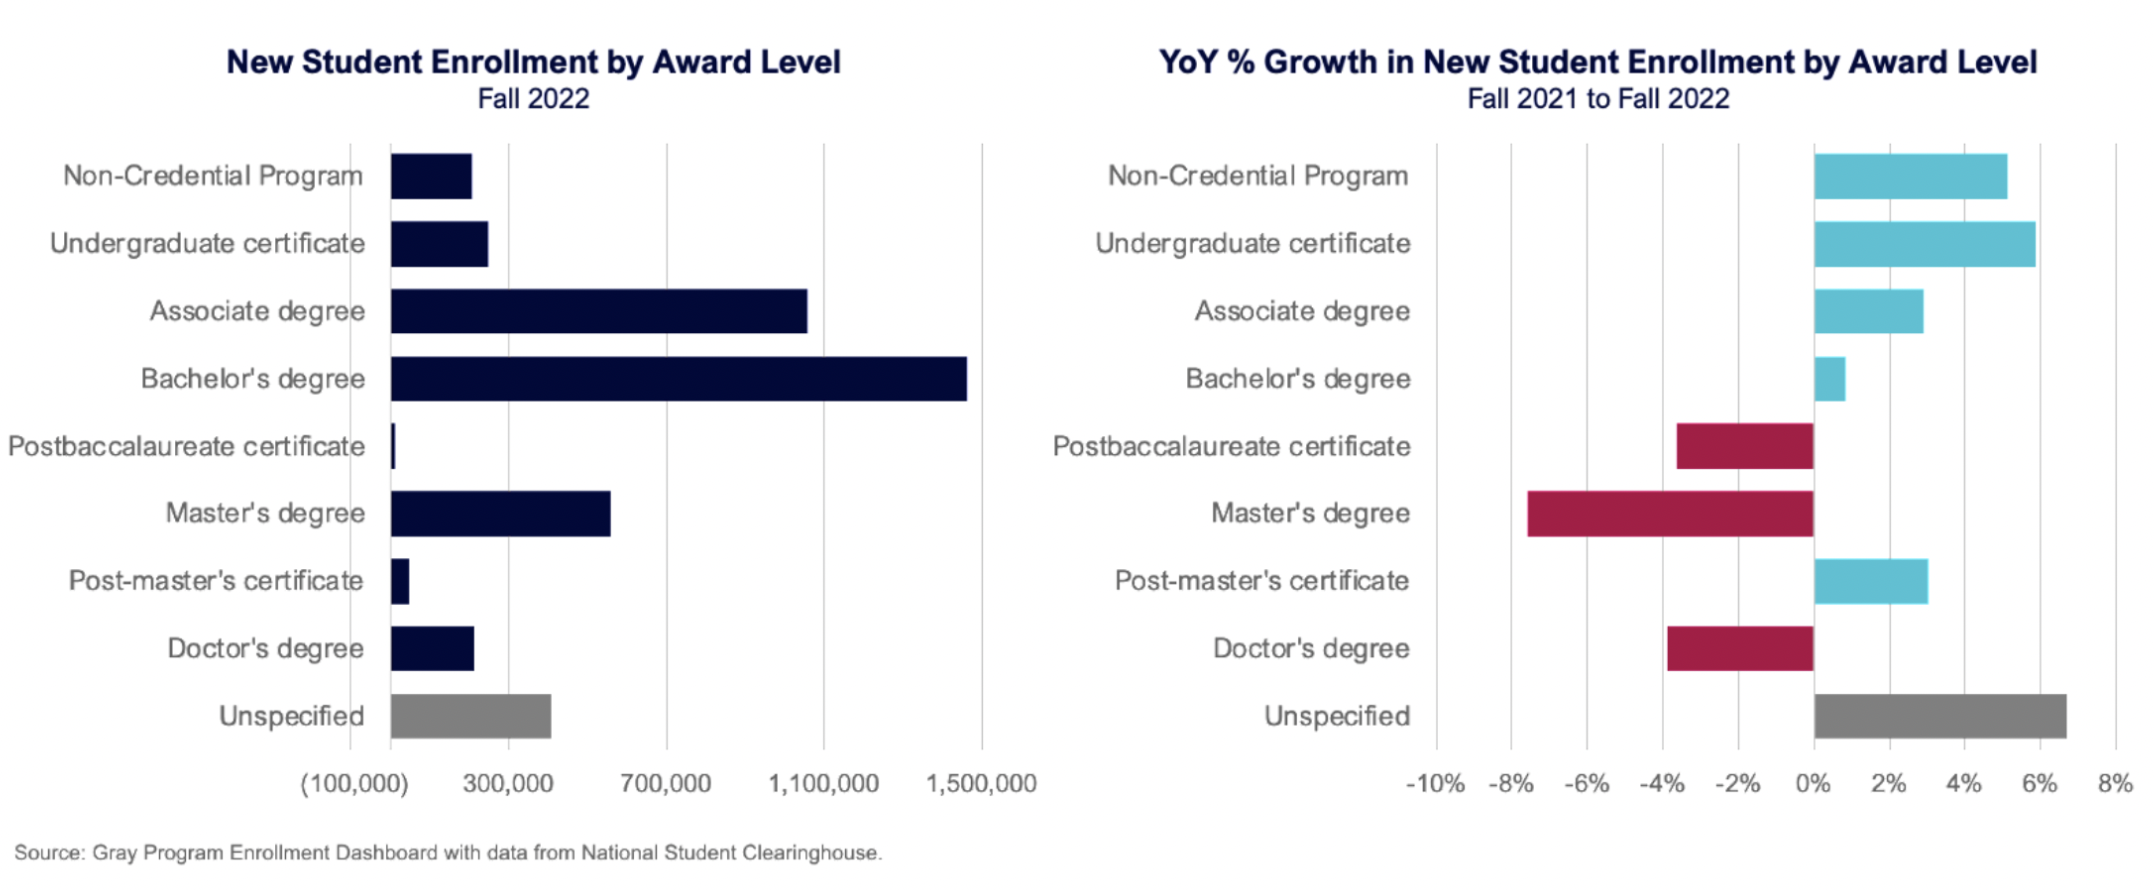 New Student Enrollment by Award Level for Fall 2022 and YoY % Growth in New Student Enrollment by Award Level